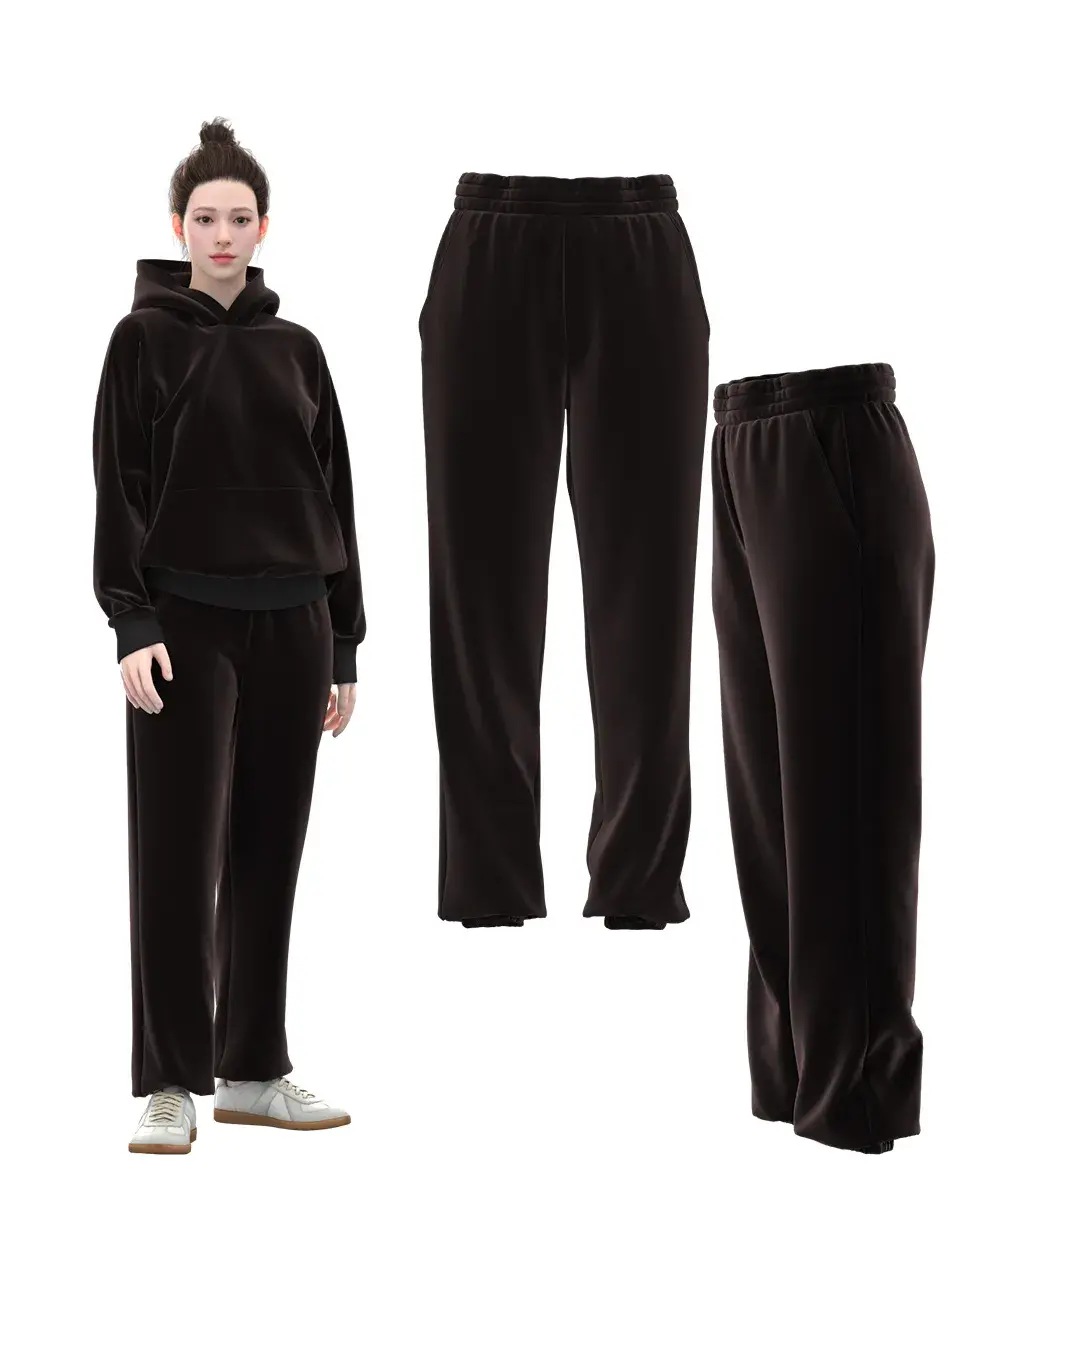 Jogger pants with side pockets